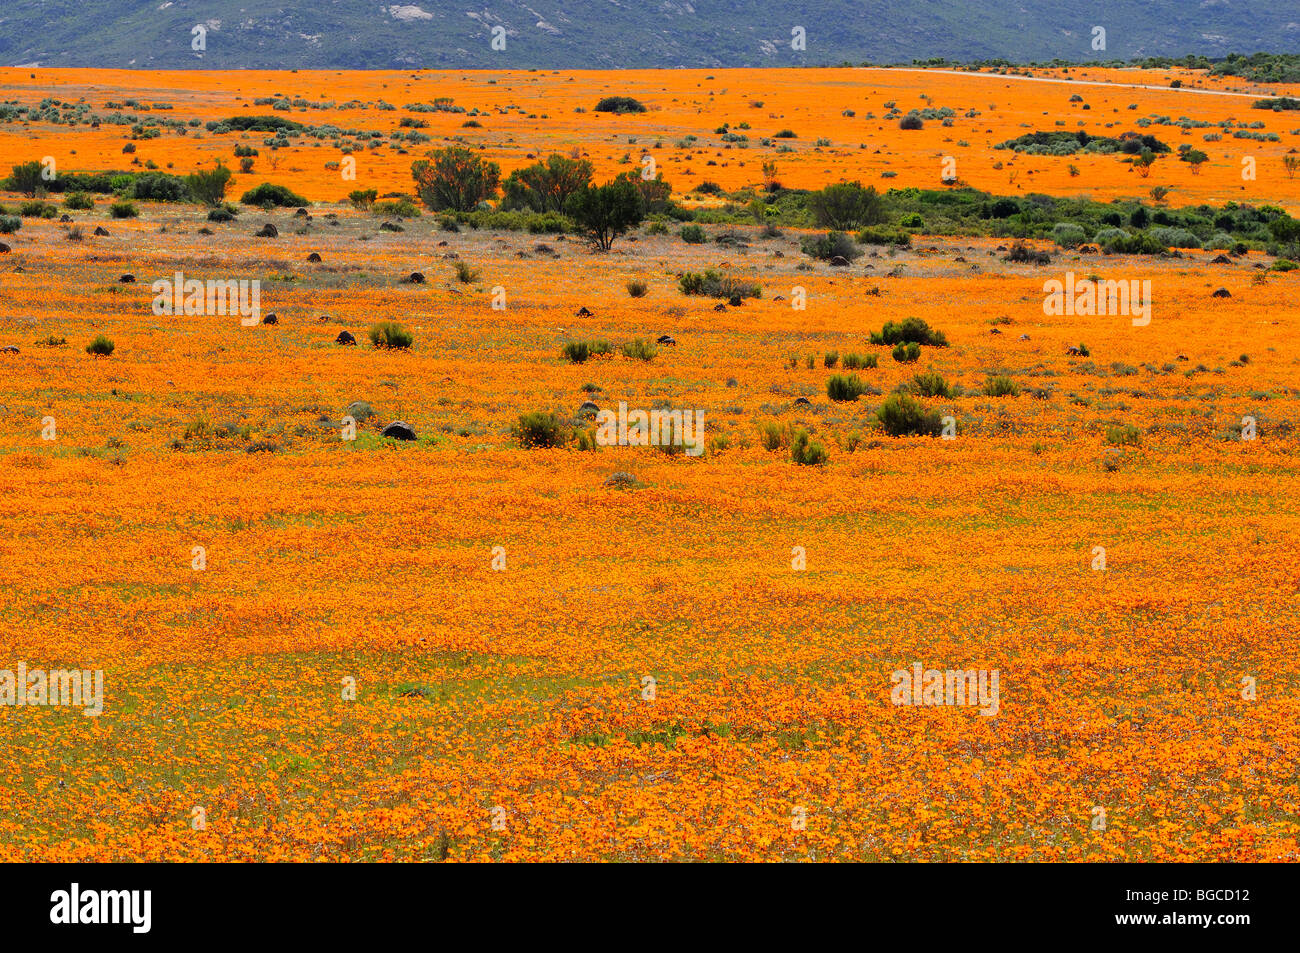 Carpet of spring flowers in Skilpad Nature Reserve near Kamieskron, Namaqualand, South Africa Stock Photo